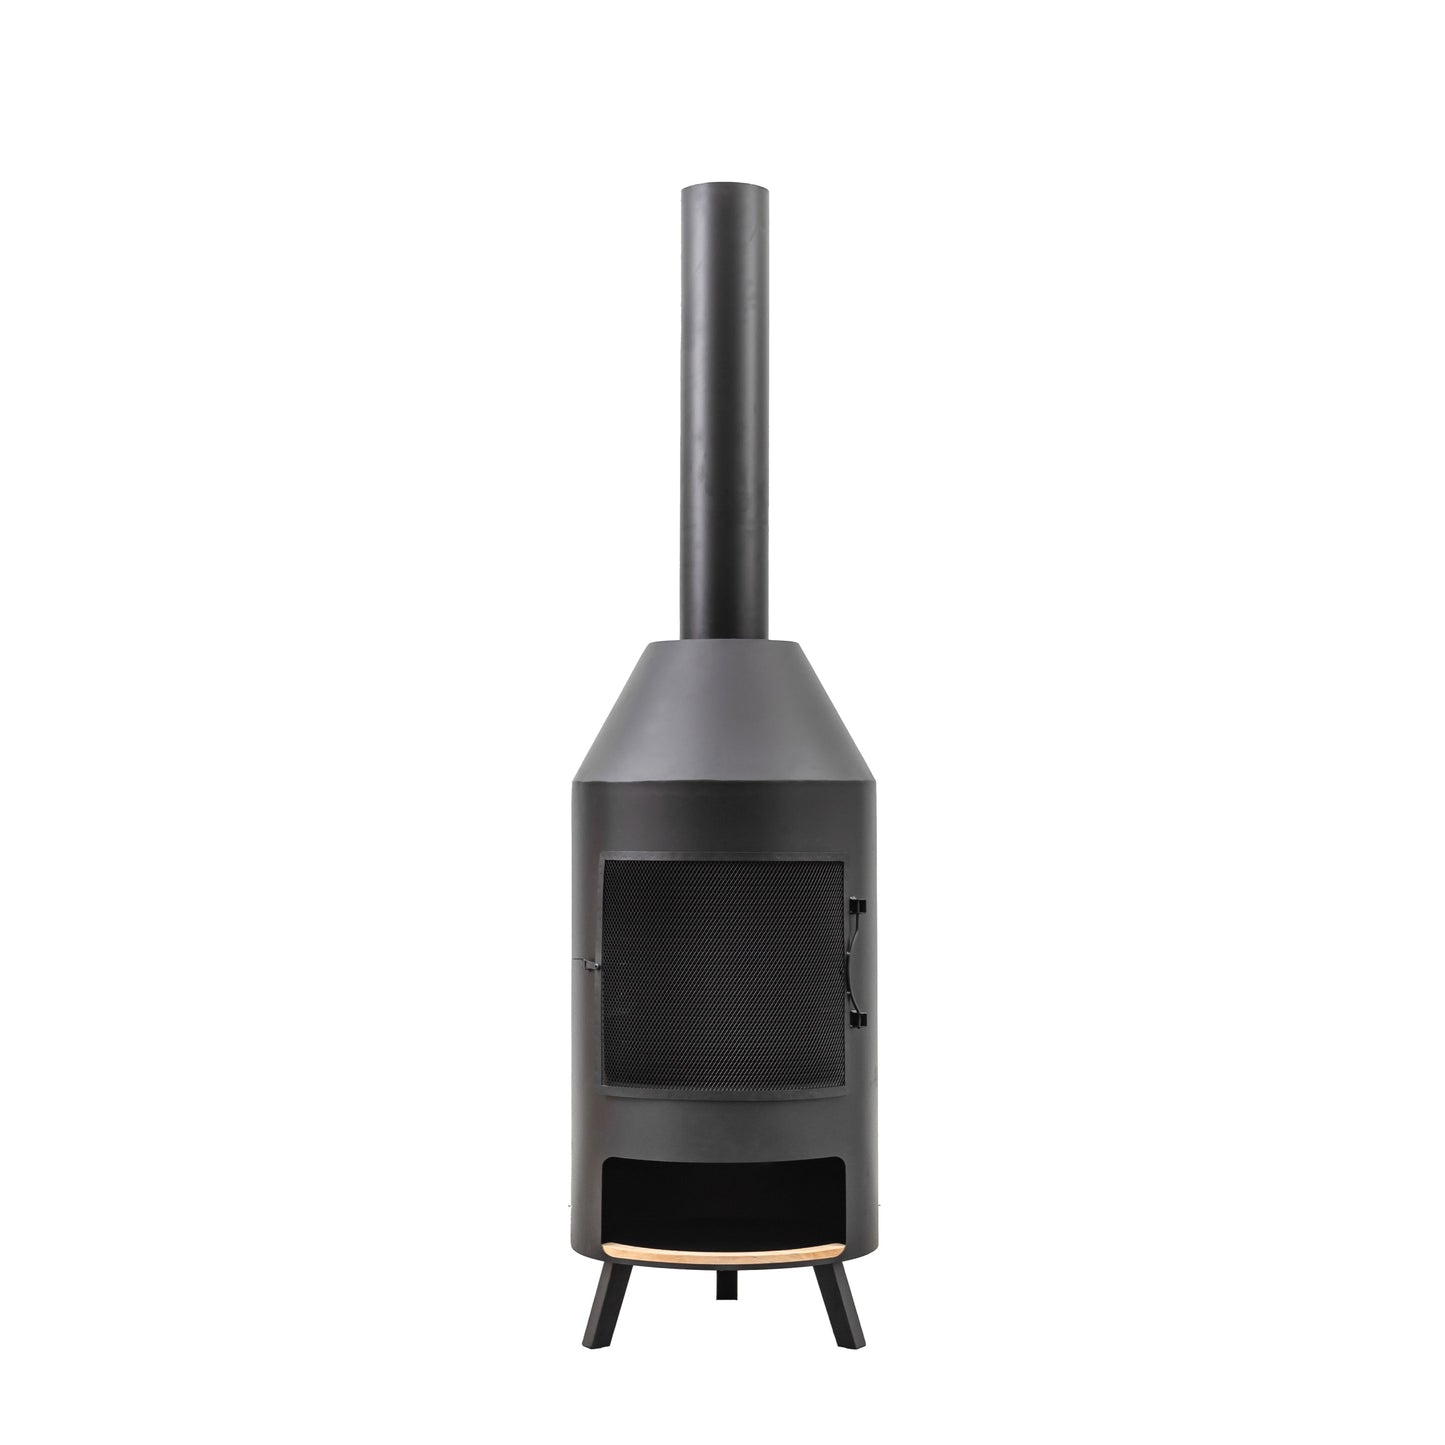 A Marldon Chiminea with Pizza Shelf, perfect for interior decor and home furniture, showcased on a white background.